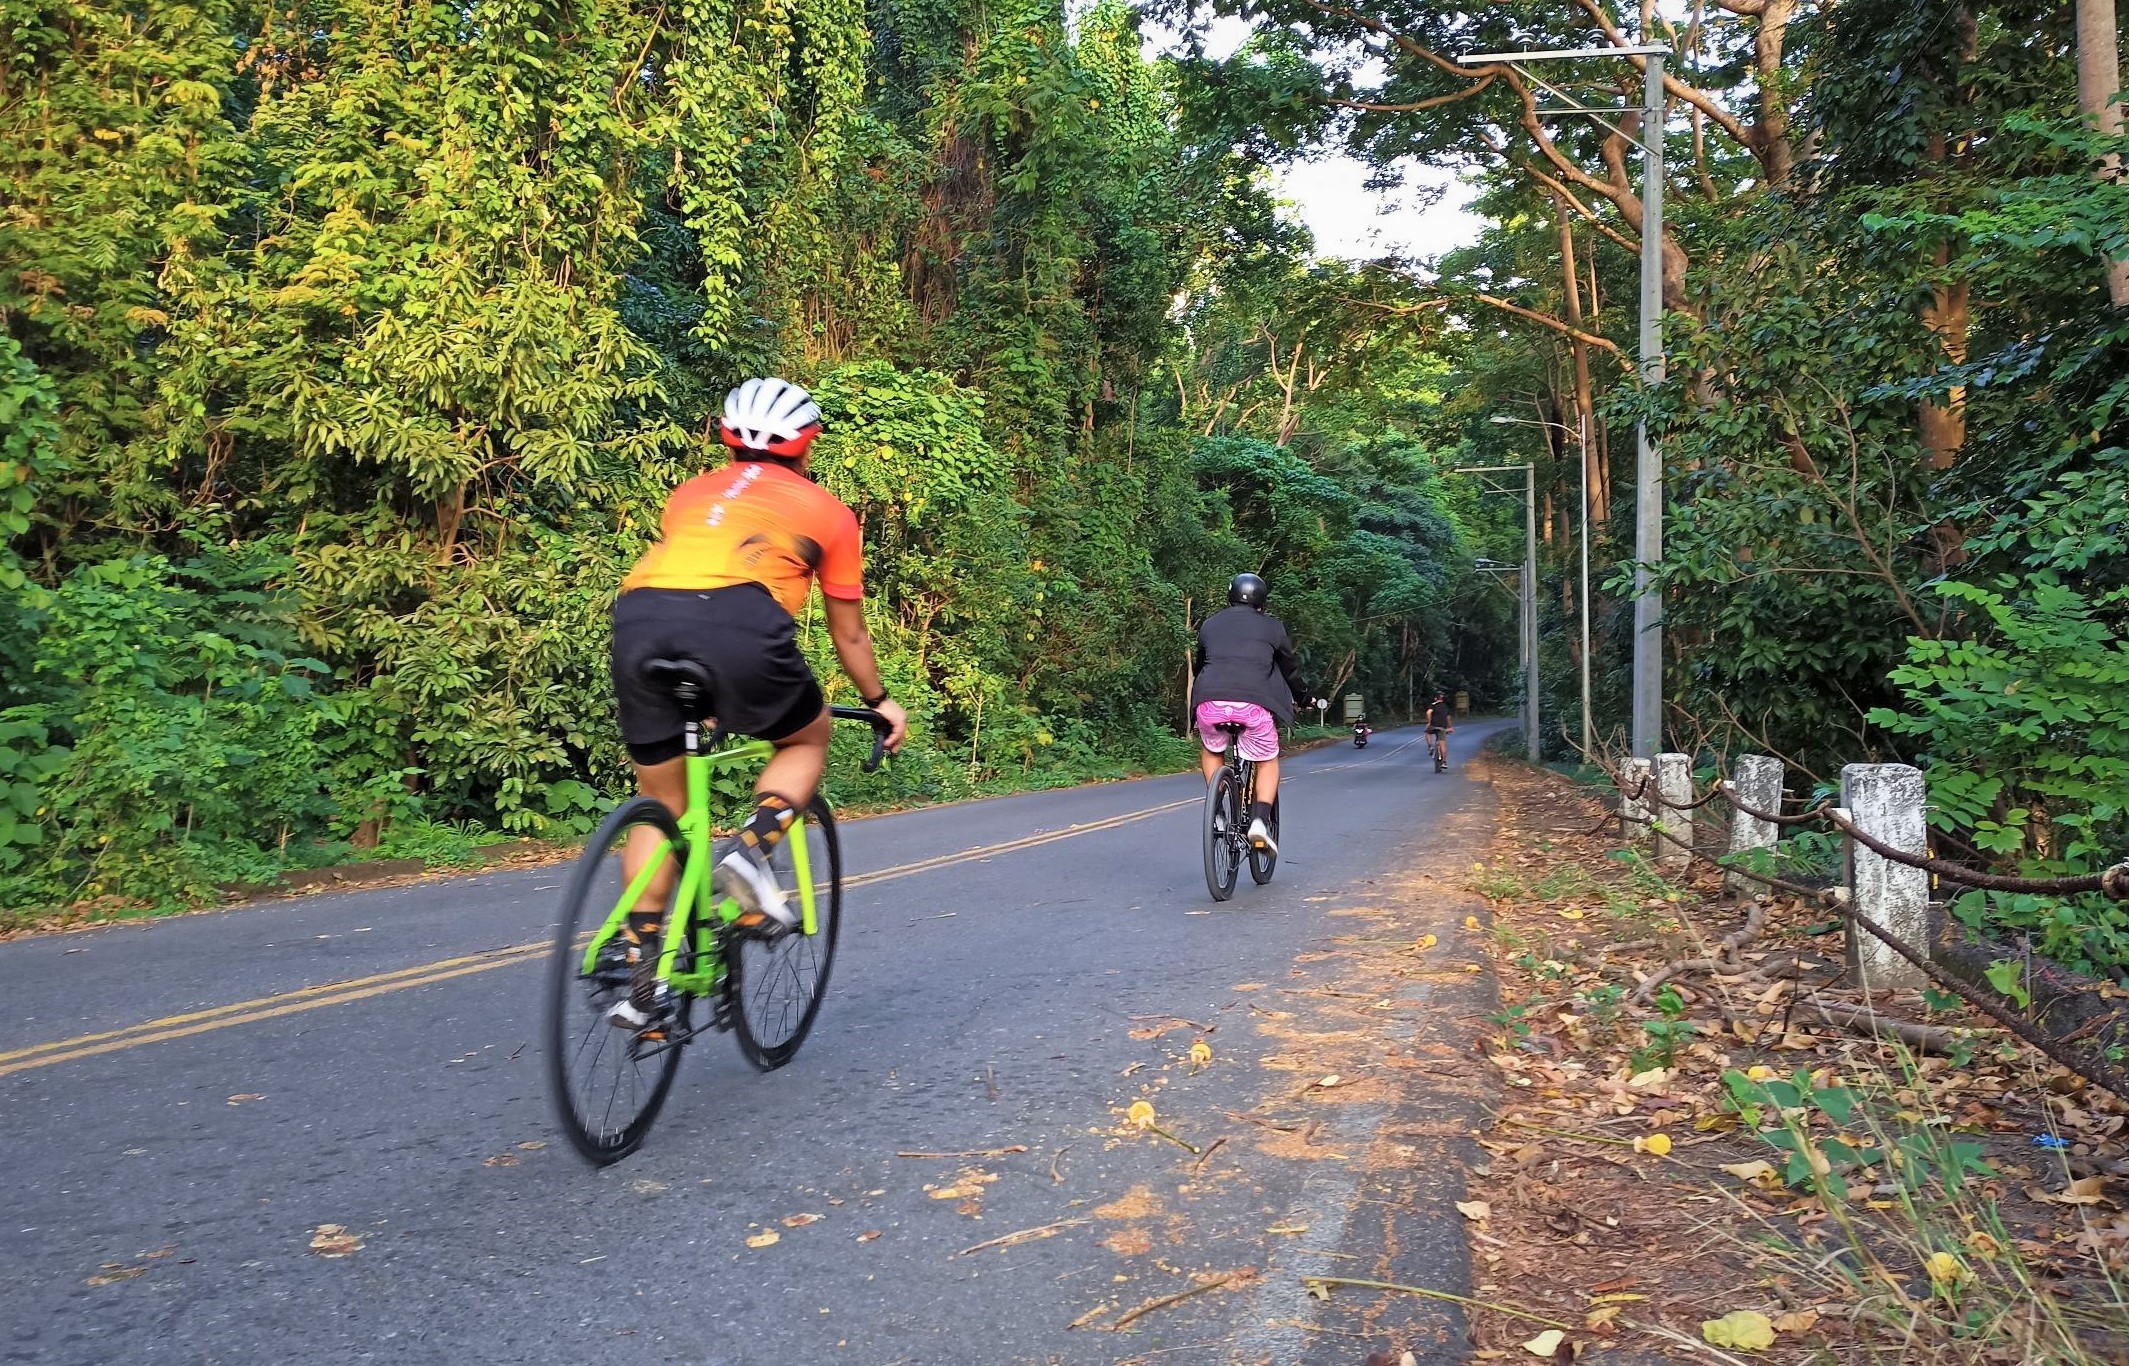 The Subic Bay Freeport has become a popular venue for leisure biking because of its healthy environment and scenic routes. The SBMA recently issued guidelines to promote bike safety in Subic.